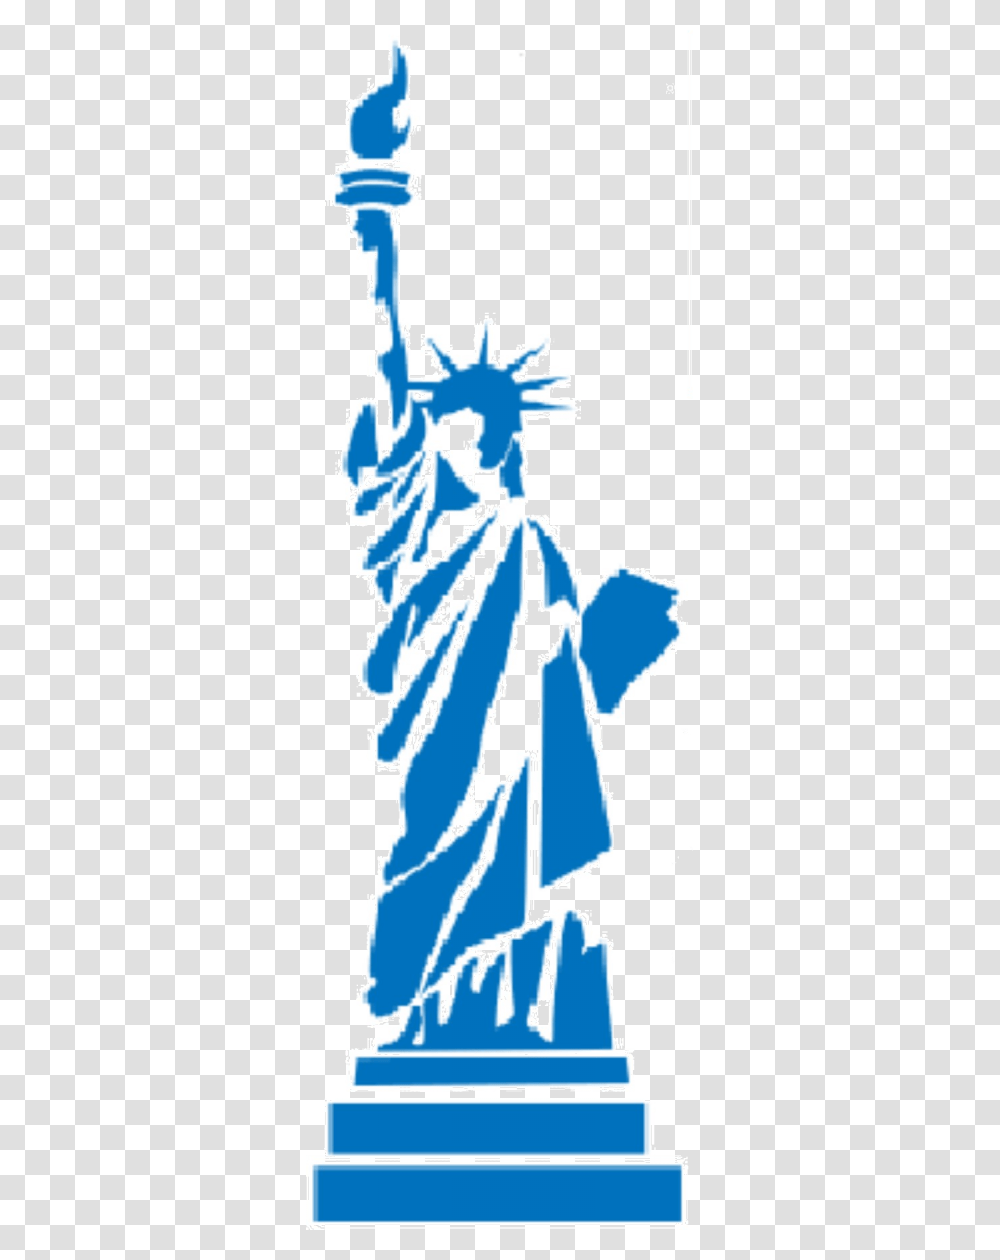 Statue Of Liberty Blue Silhouette Blue Statue Of Liberty, Metropolis, City Transparent Png